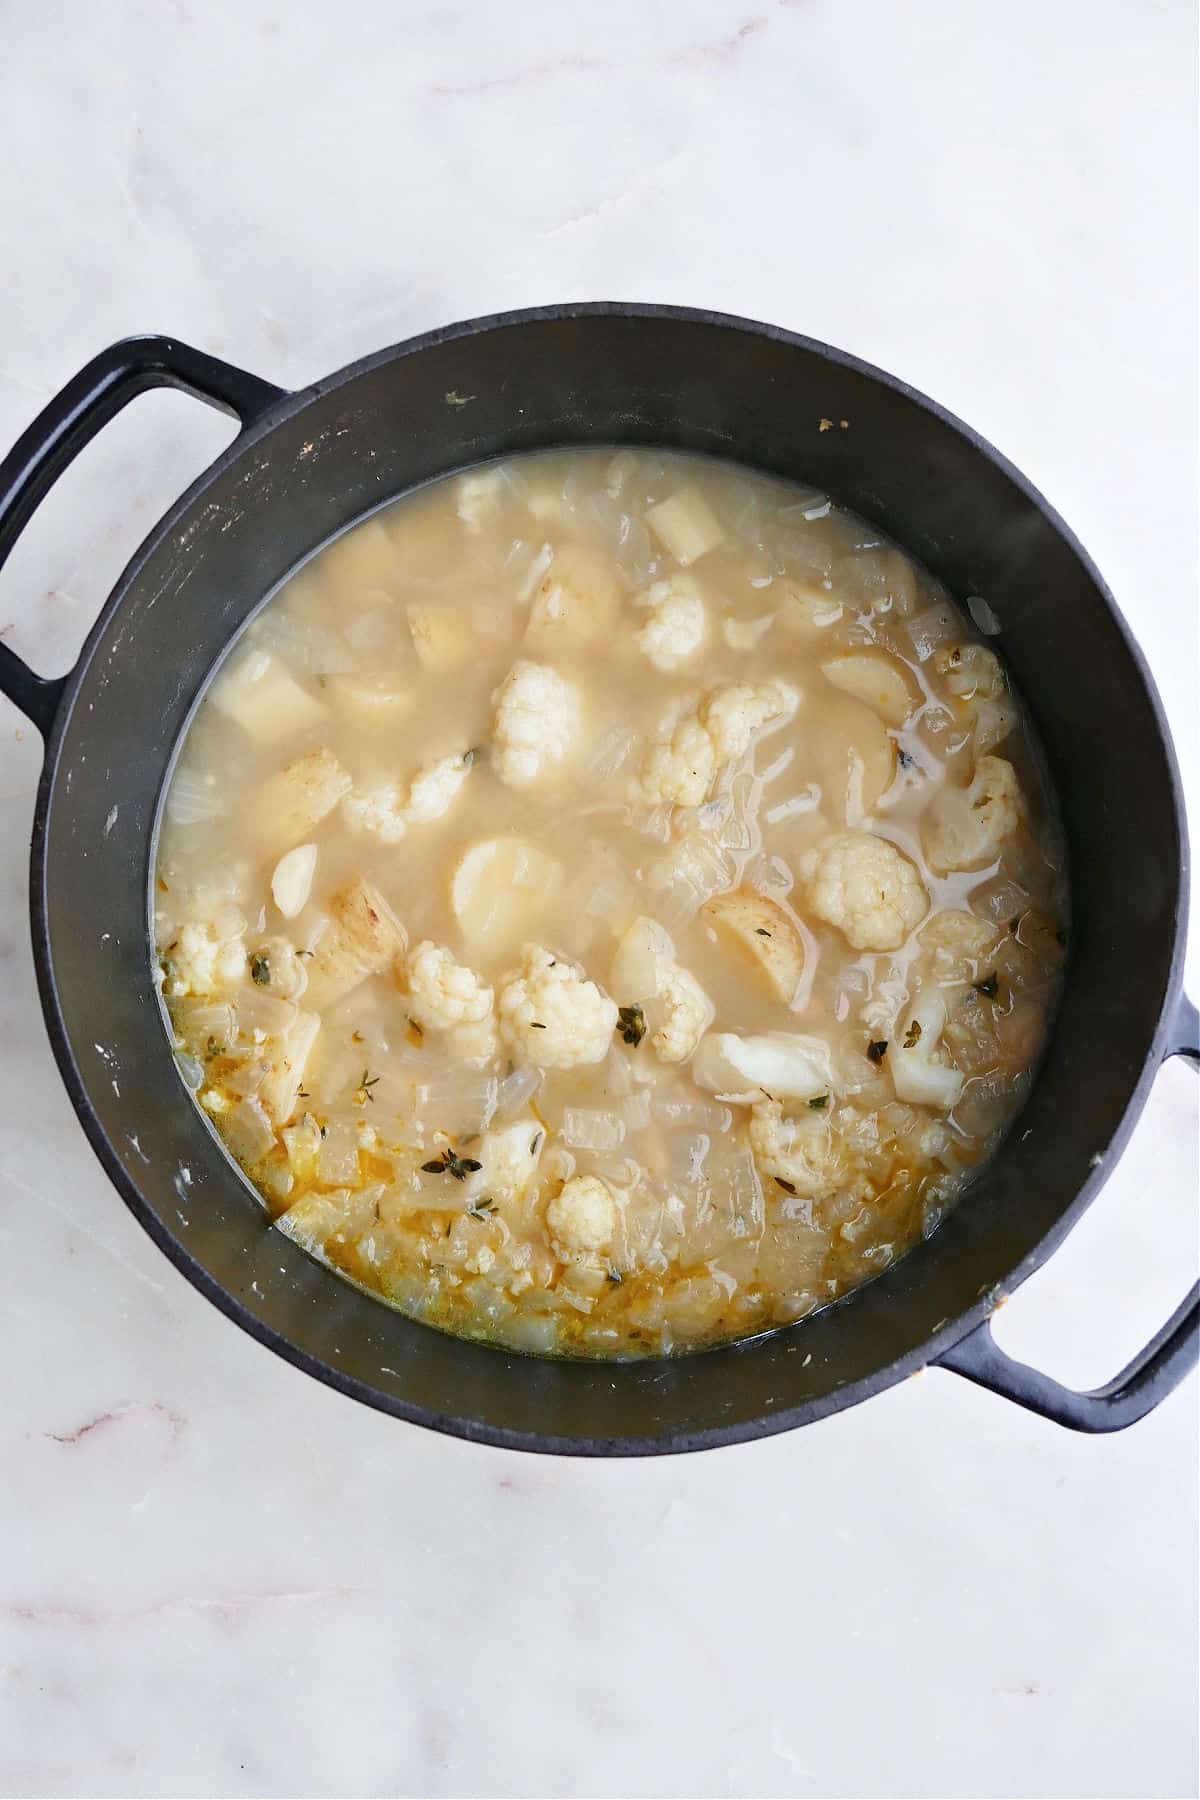 cooked cauliflower, parsnips, onions, and white beans in veggie broth in a large pot